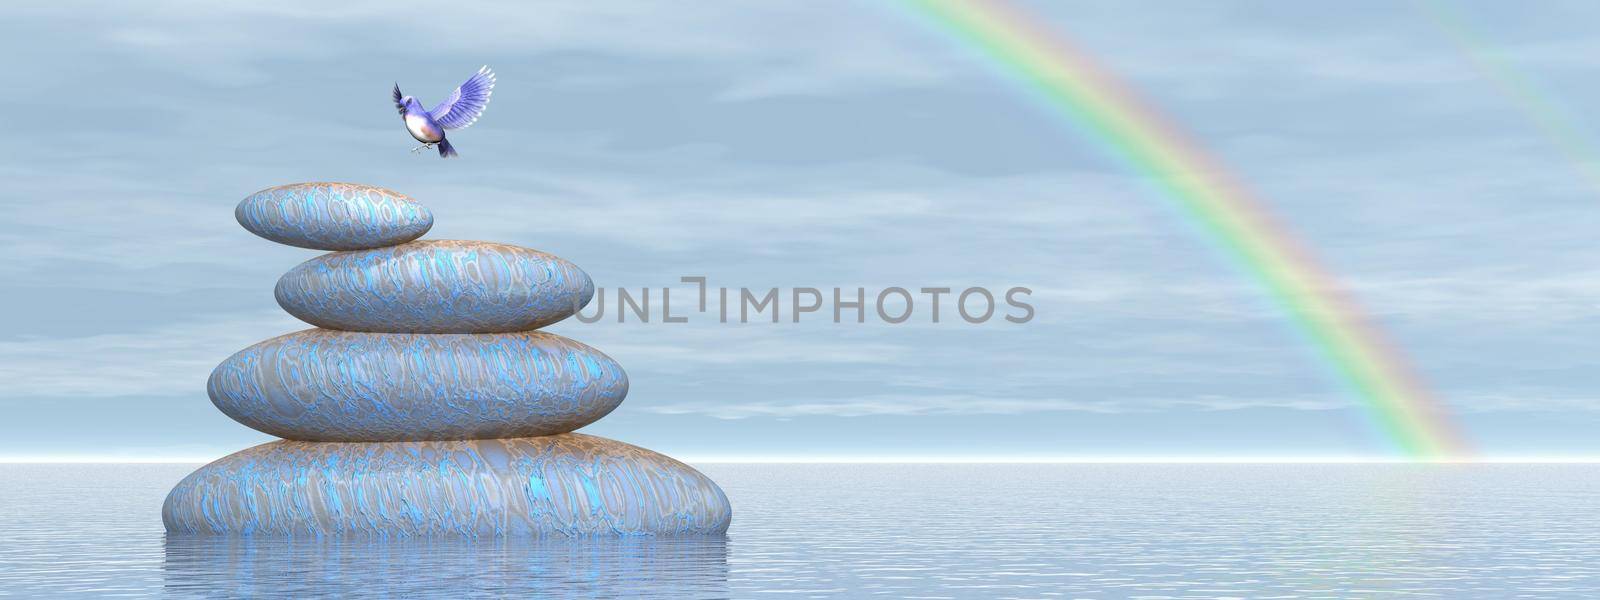 Beautiful blue bird flying upon stones in water under rainbow by clear day